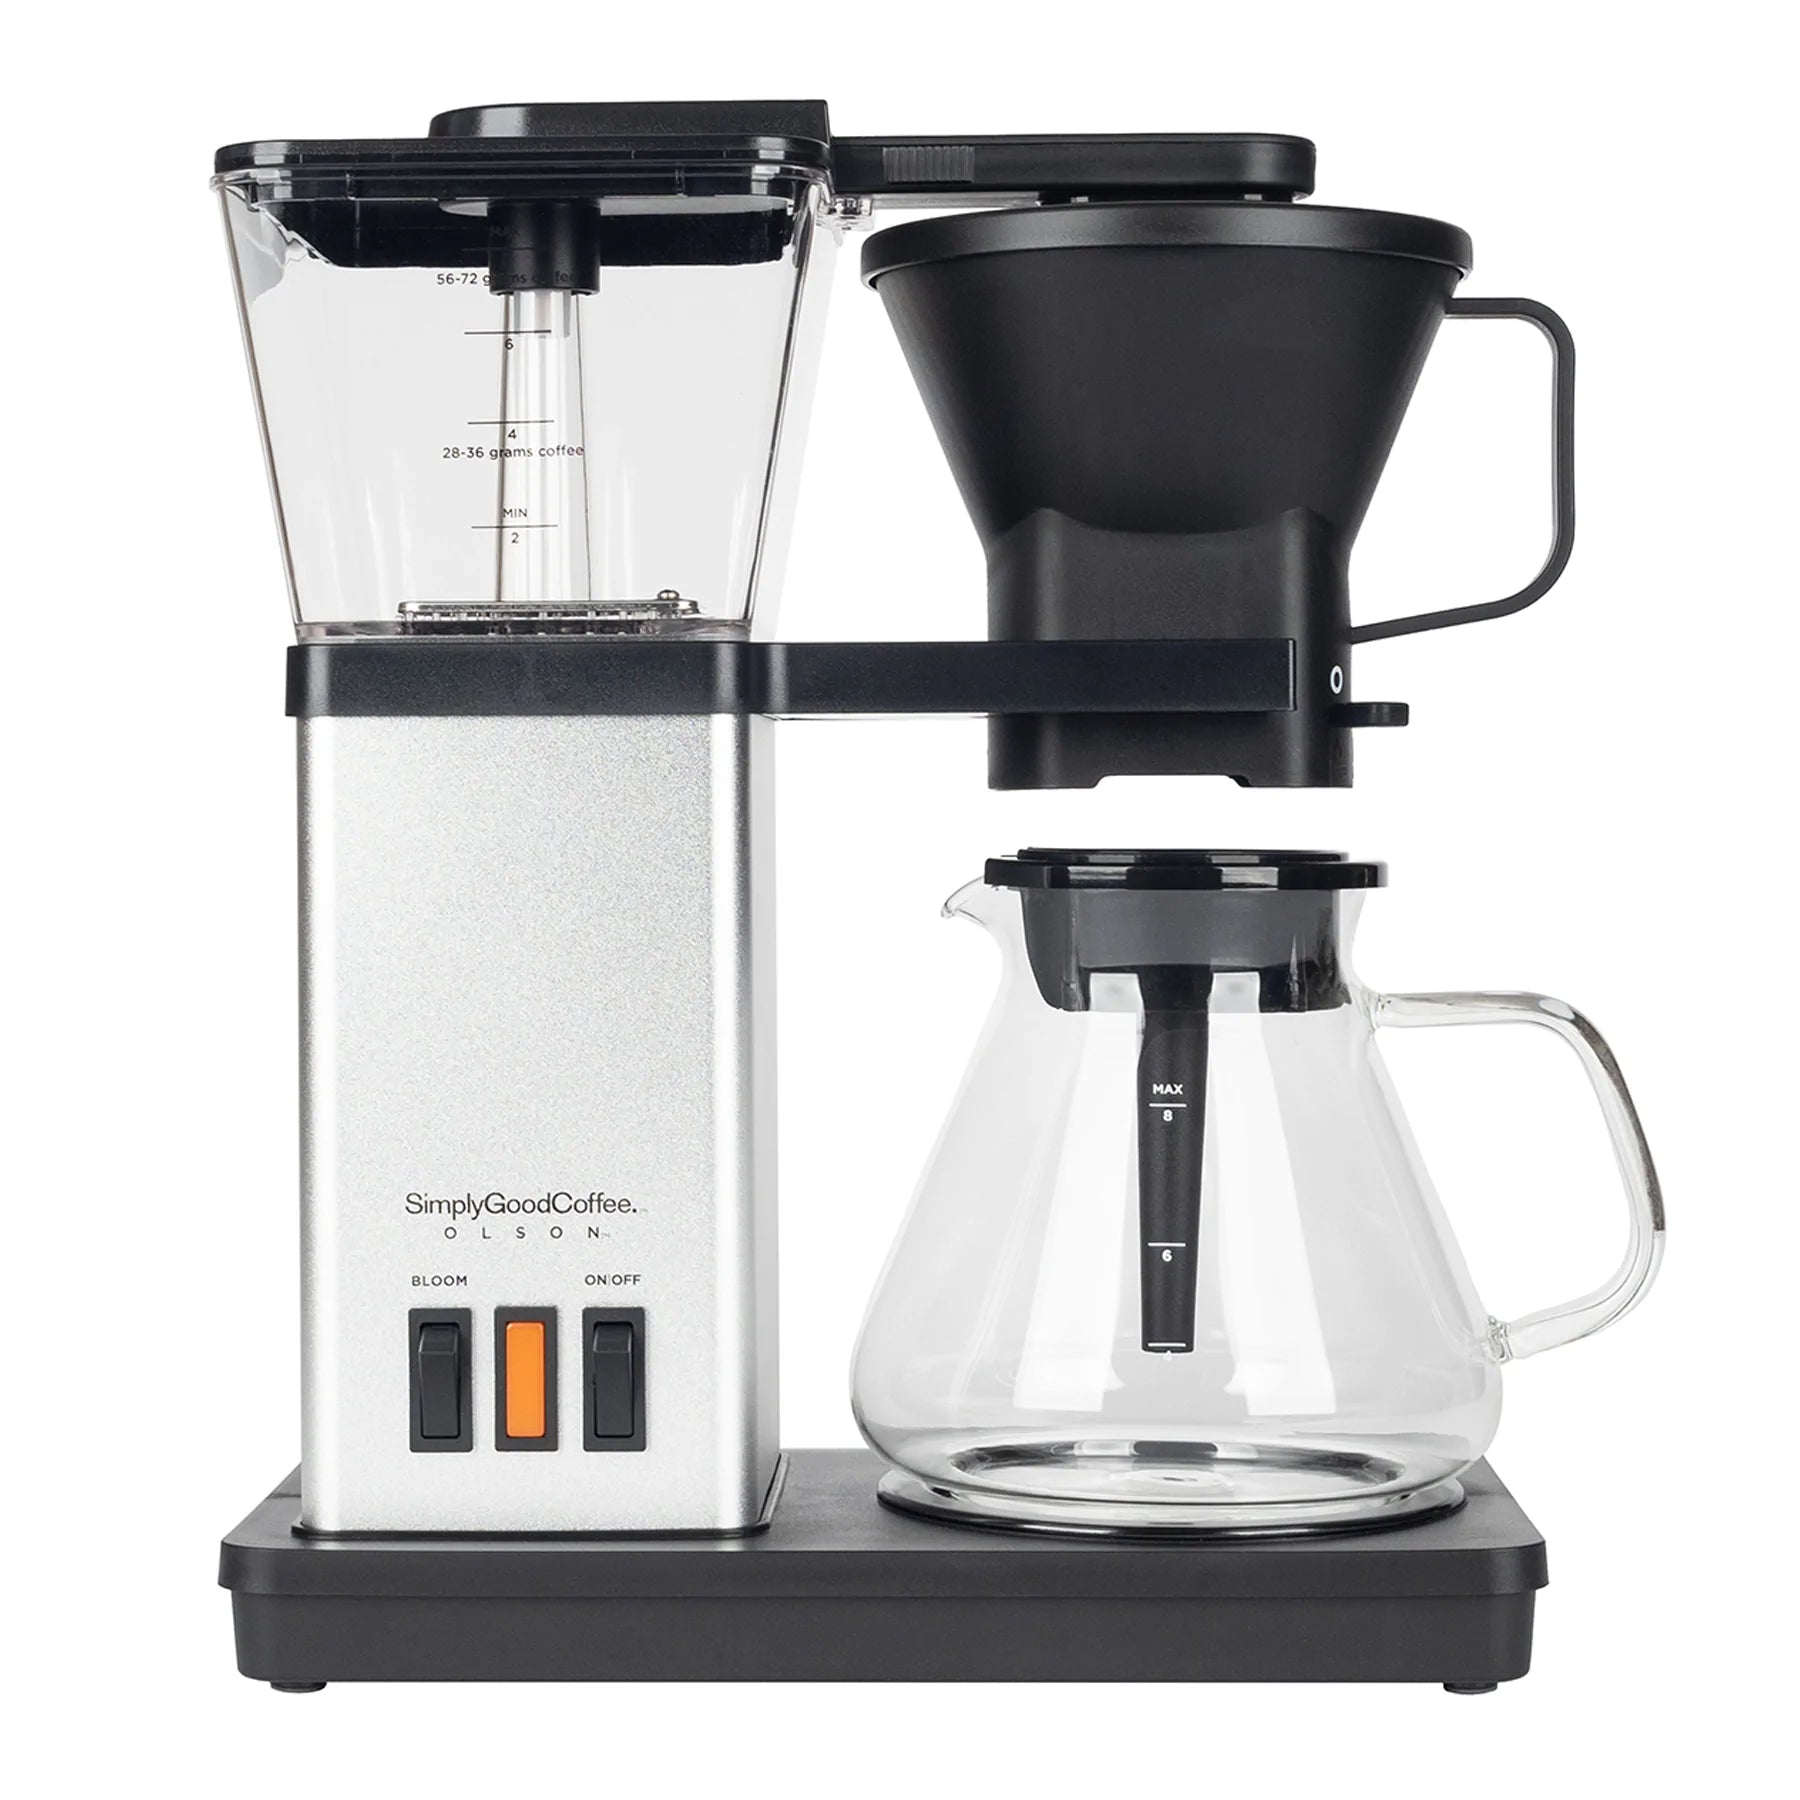 Simply Good Coffee Brewer is the future of good coffee at home